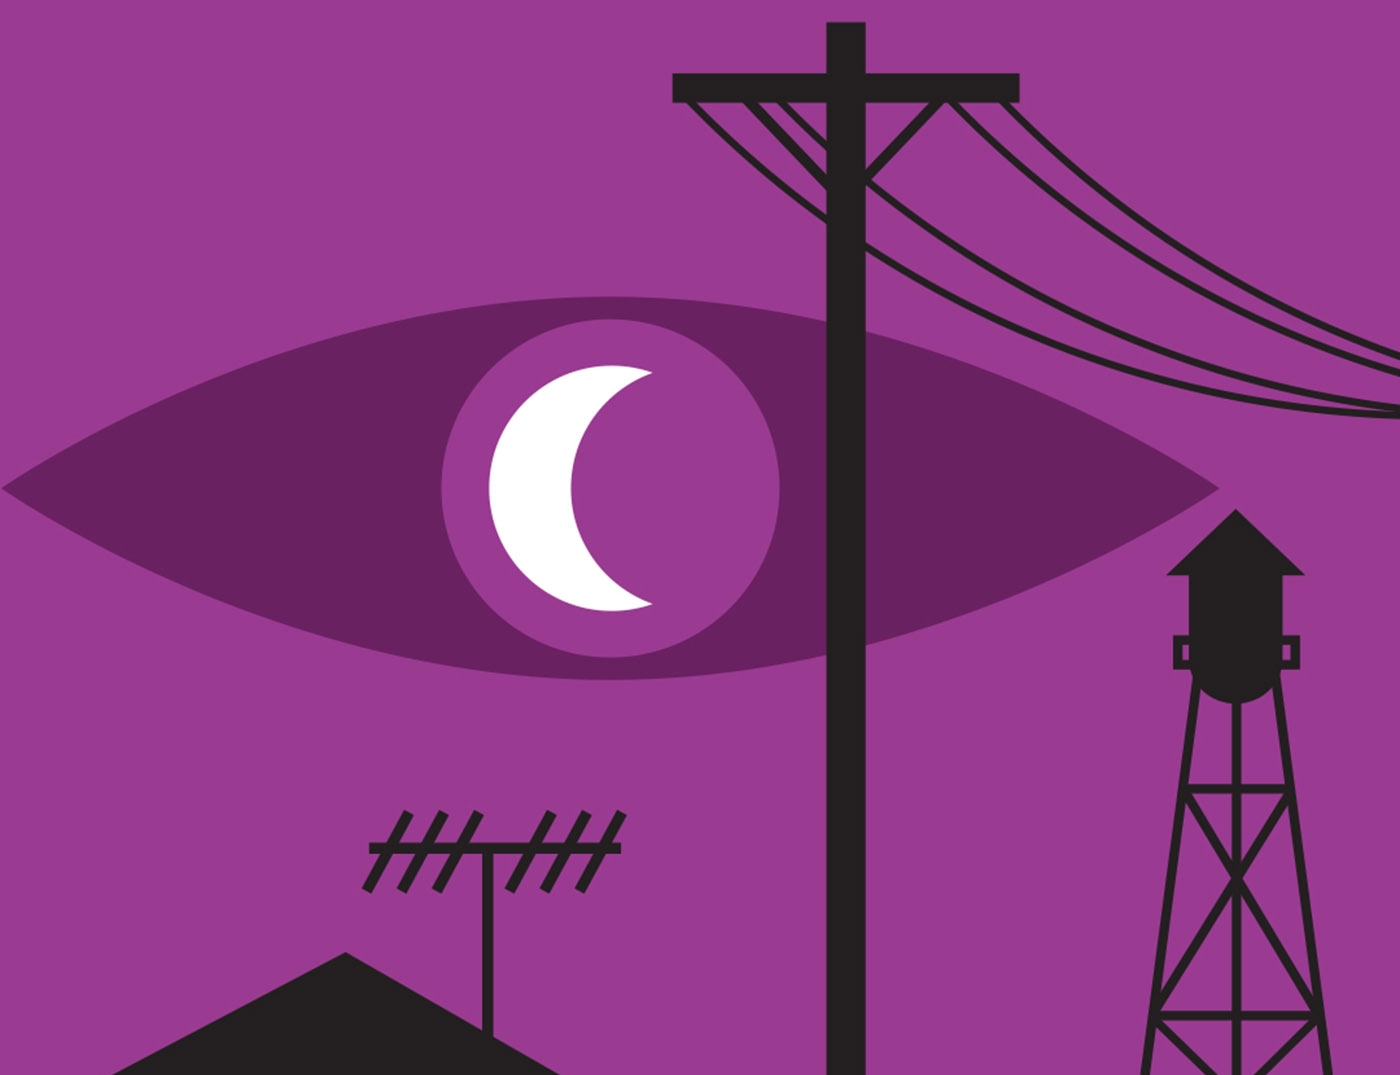 Geek insider, geekinsider, geekinsider. Com,, hello readers, welcome to nightvale , entertainment